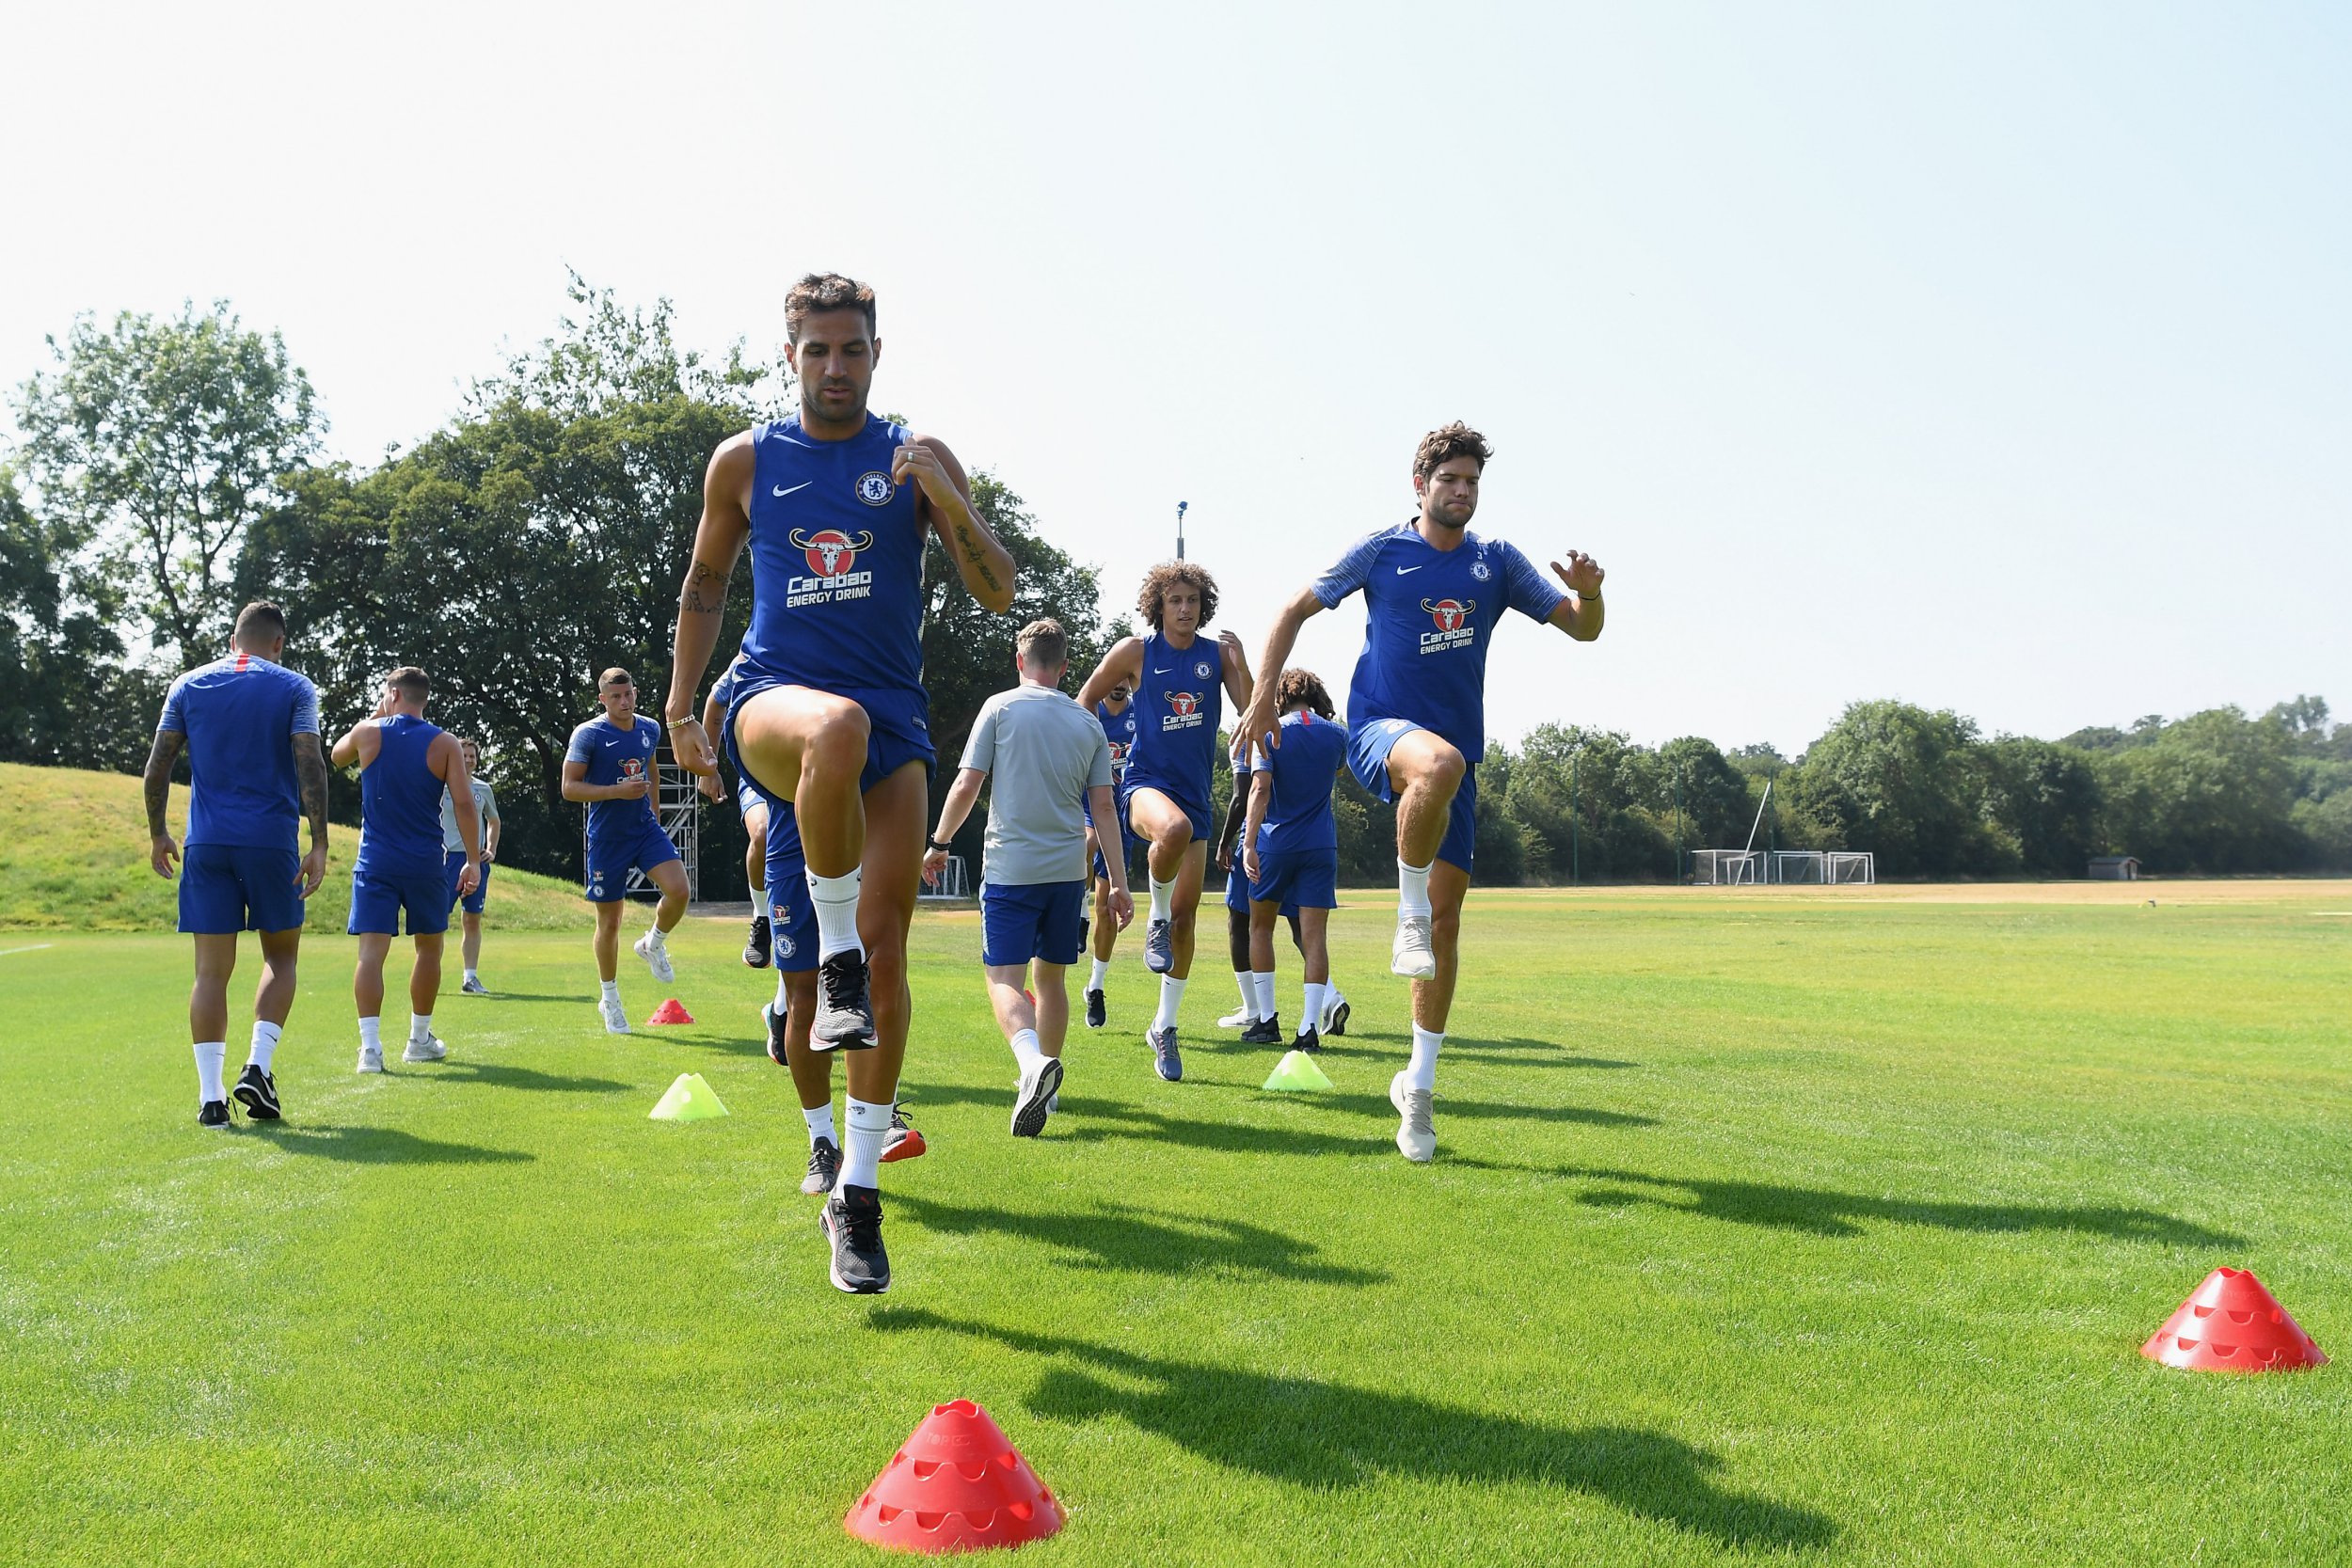 Antonio Conte was at Cobham training ground for day one of Chelsea's pre-season